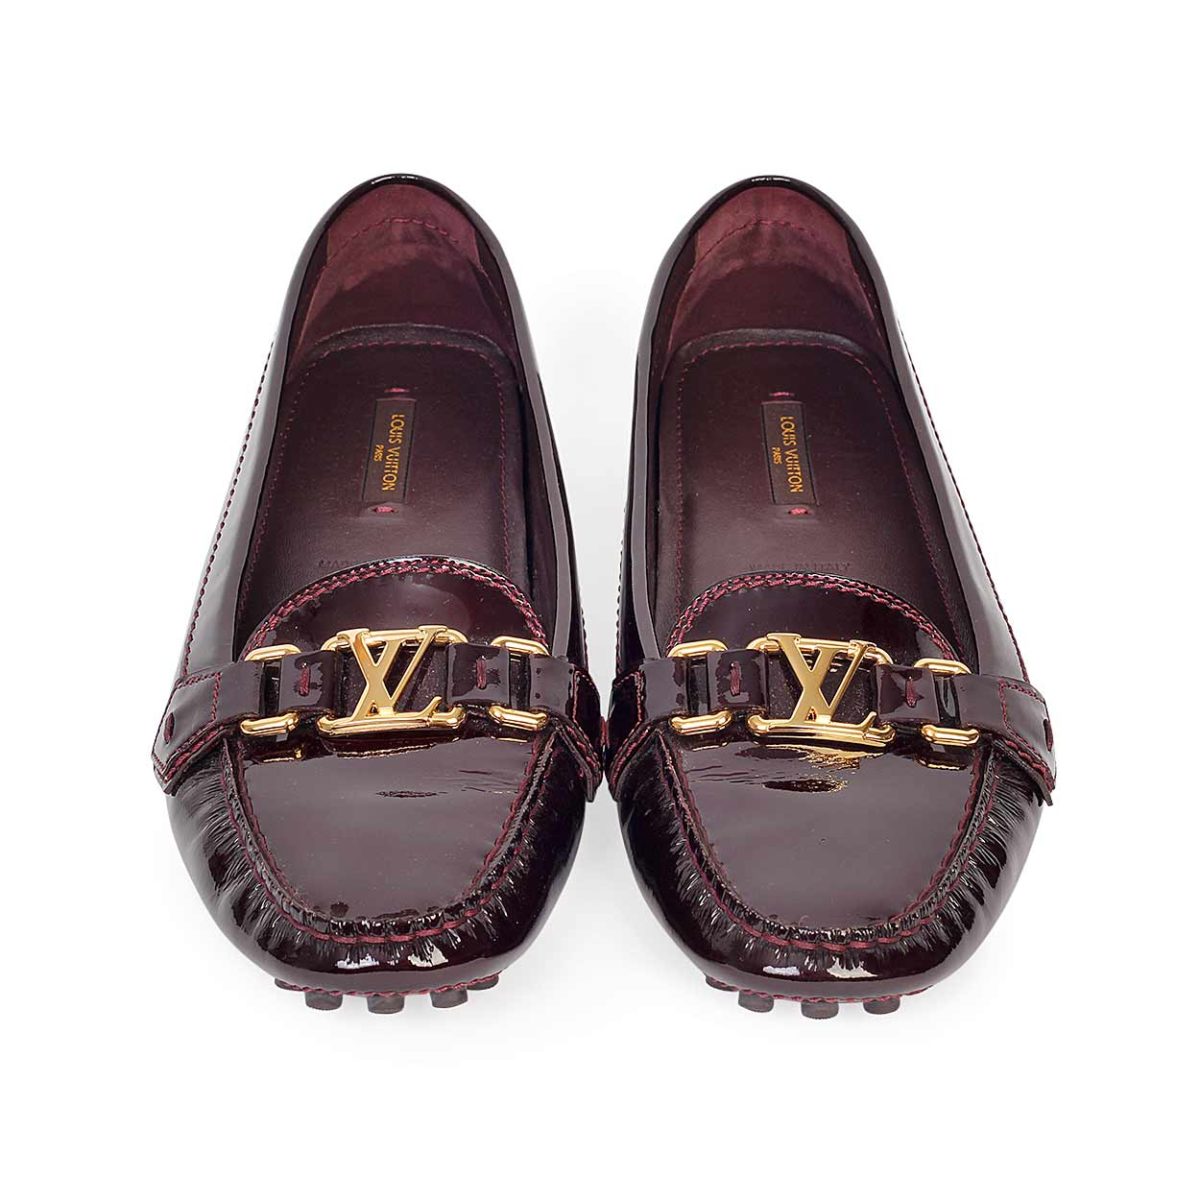 shoes: lv shoes loafers price